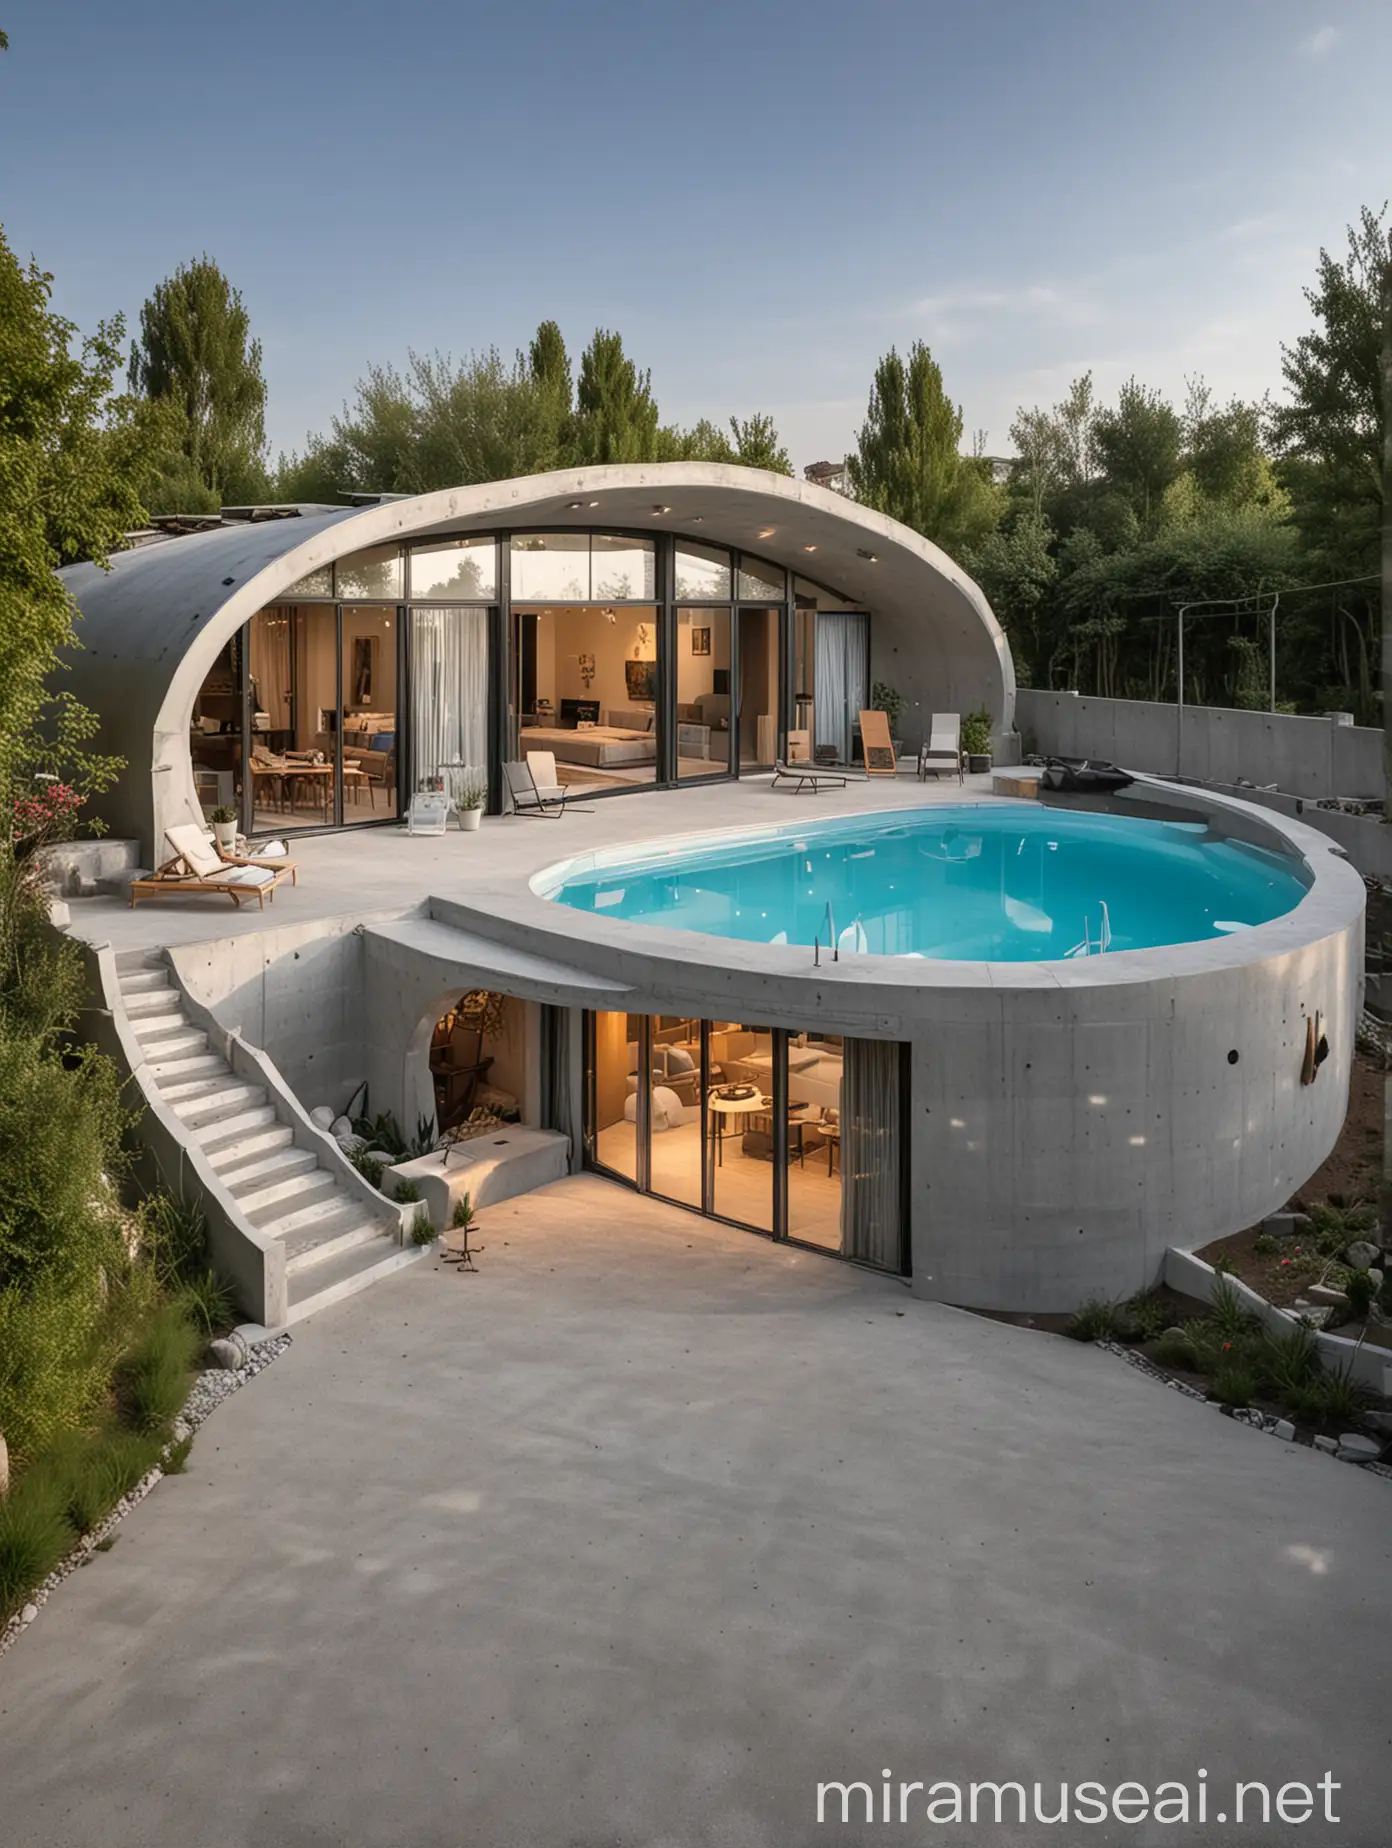 A modern house, duplex gray concrete prefabricated house with a pool, semi-circular arched design, terrace, creative lighting, A movable prefabricated house with dimensions of 200 square meters on the ground floor and 200 square meters on the upper floor, on a 700 square meter plot, featuring a glass roof.